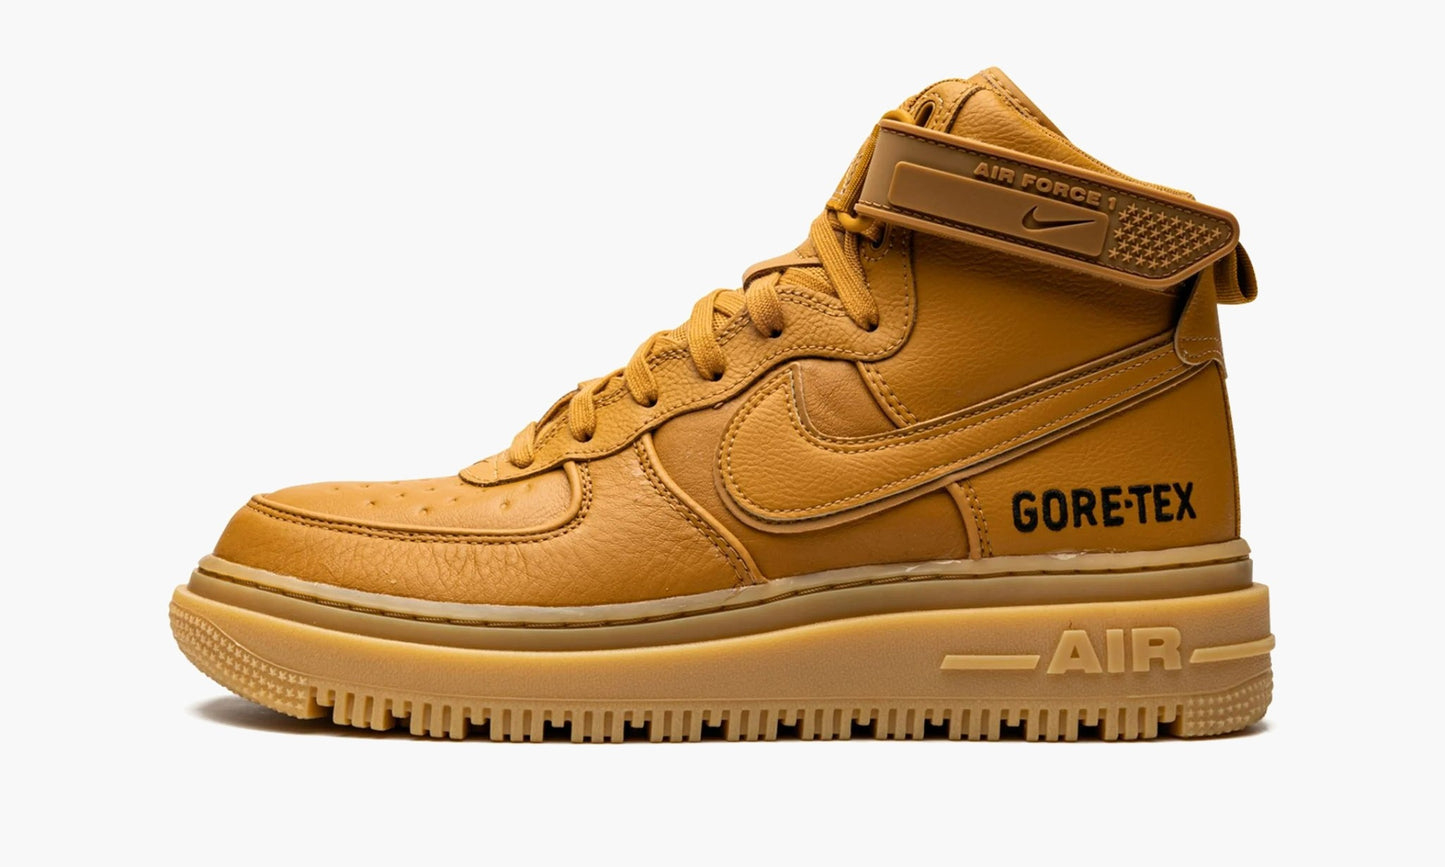 Air Force 1 High Gore-Tex Boot Flax - CT2815 200 | The Sortage